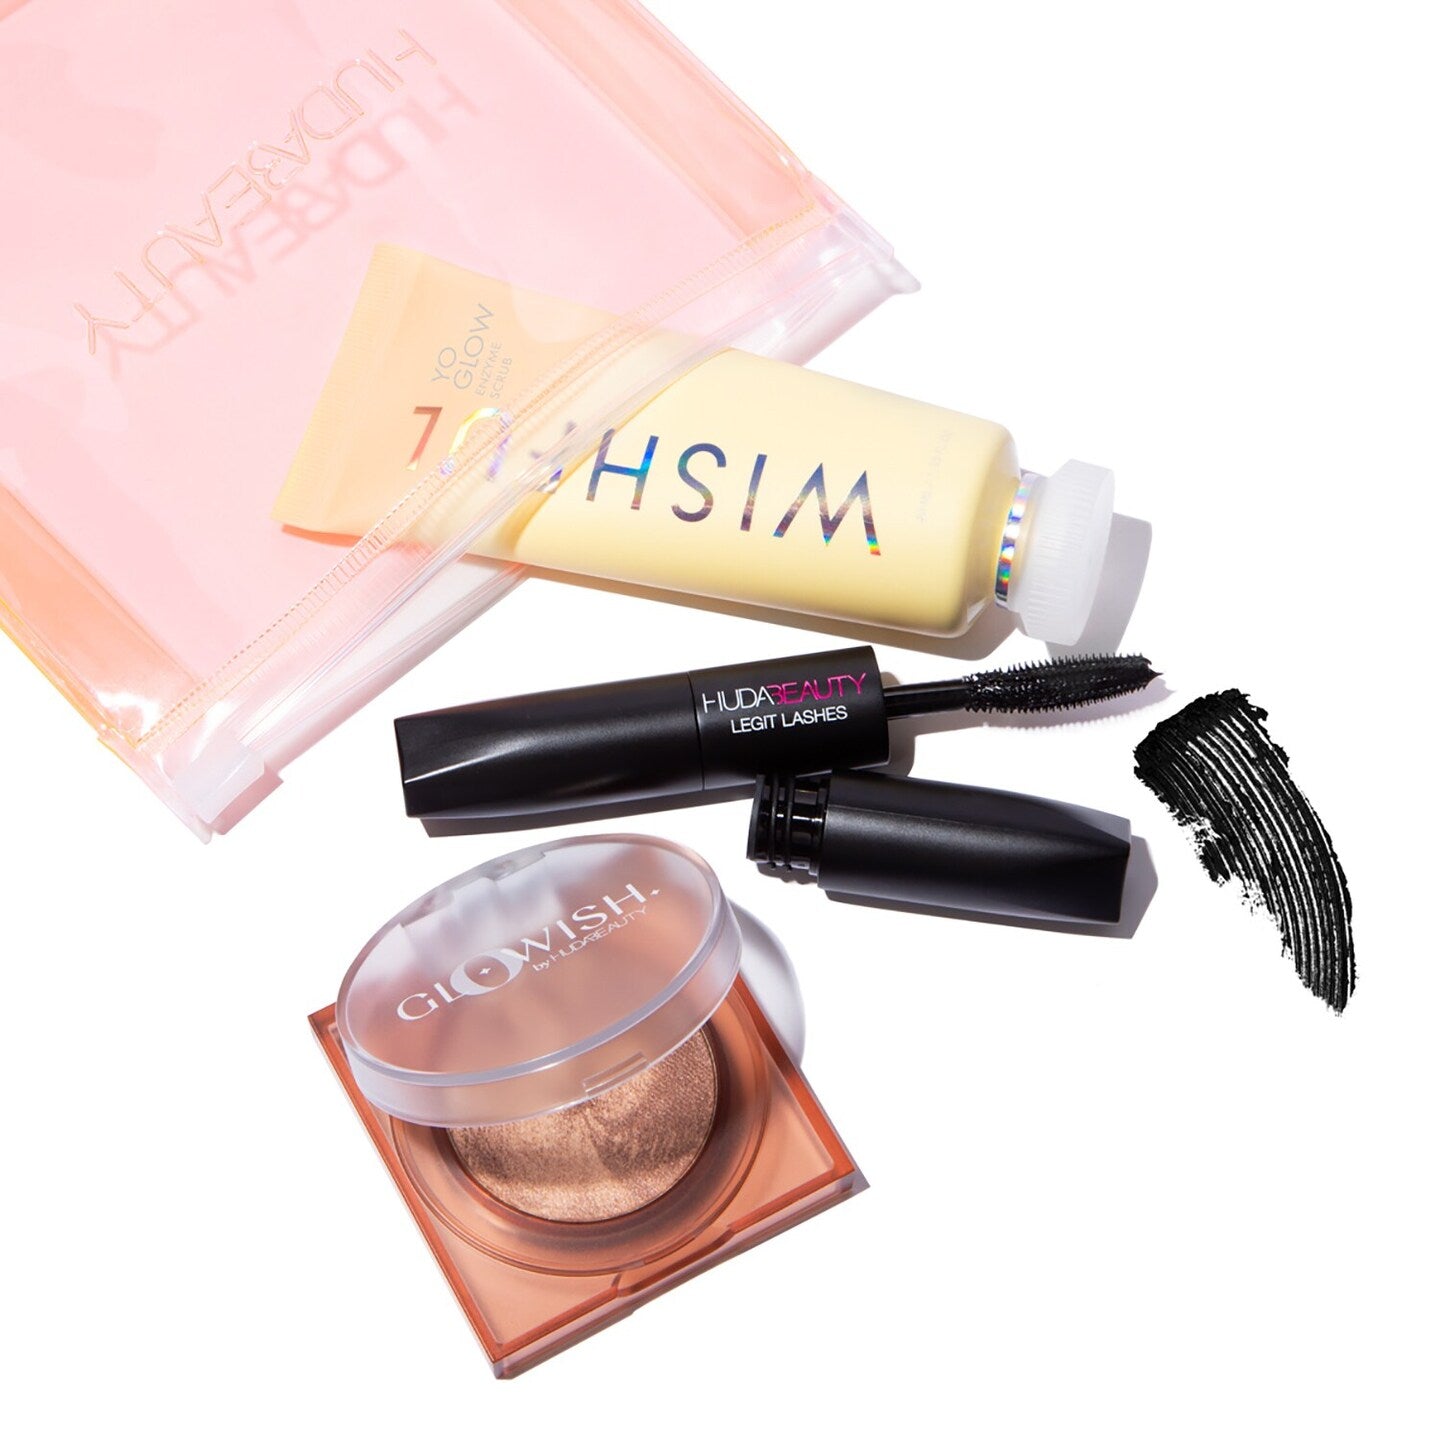 huda-beauty-on-the-go-must-haves-trio-pour-le-visage